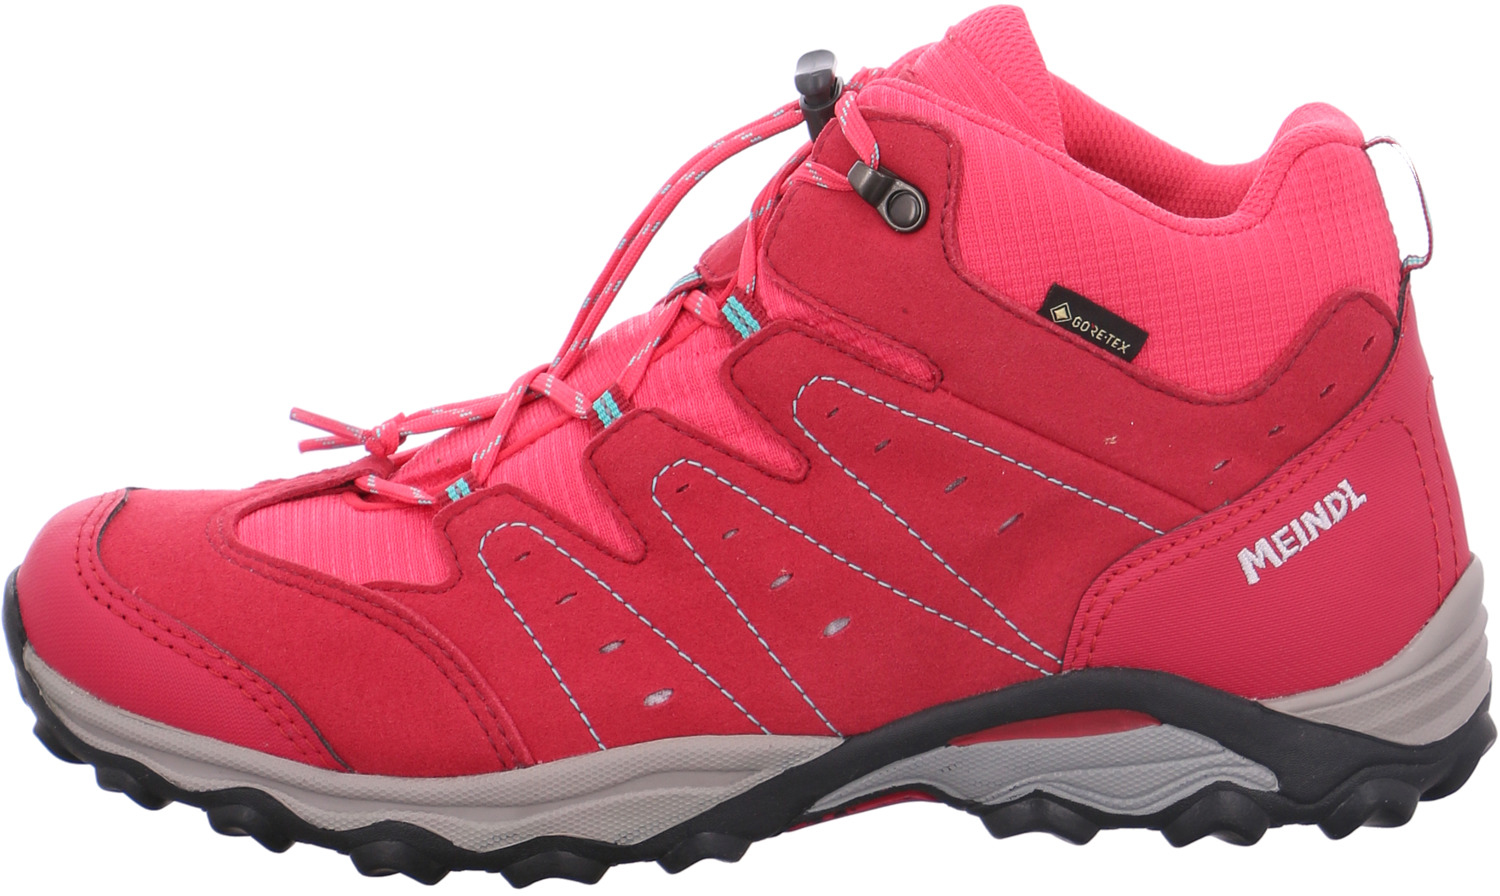 Meindl Outdoor Stiefel Rot